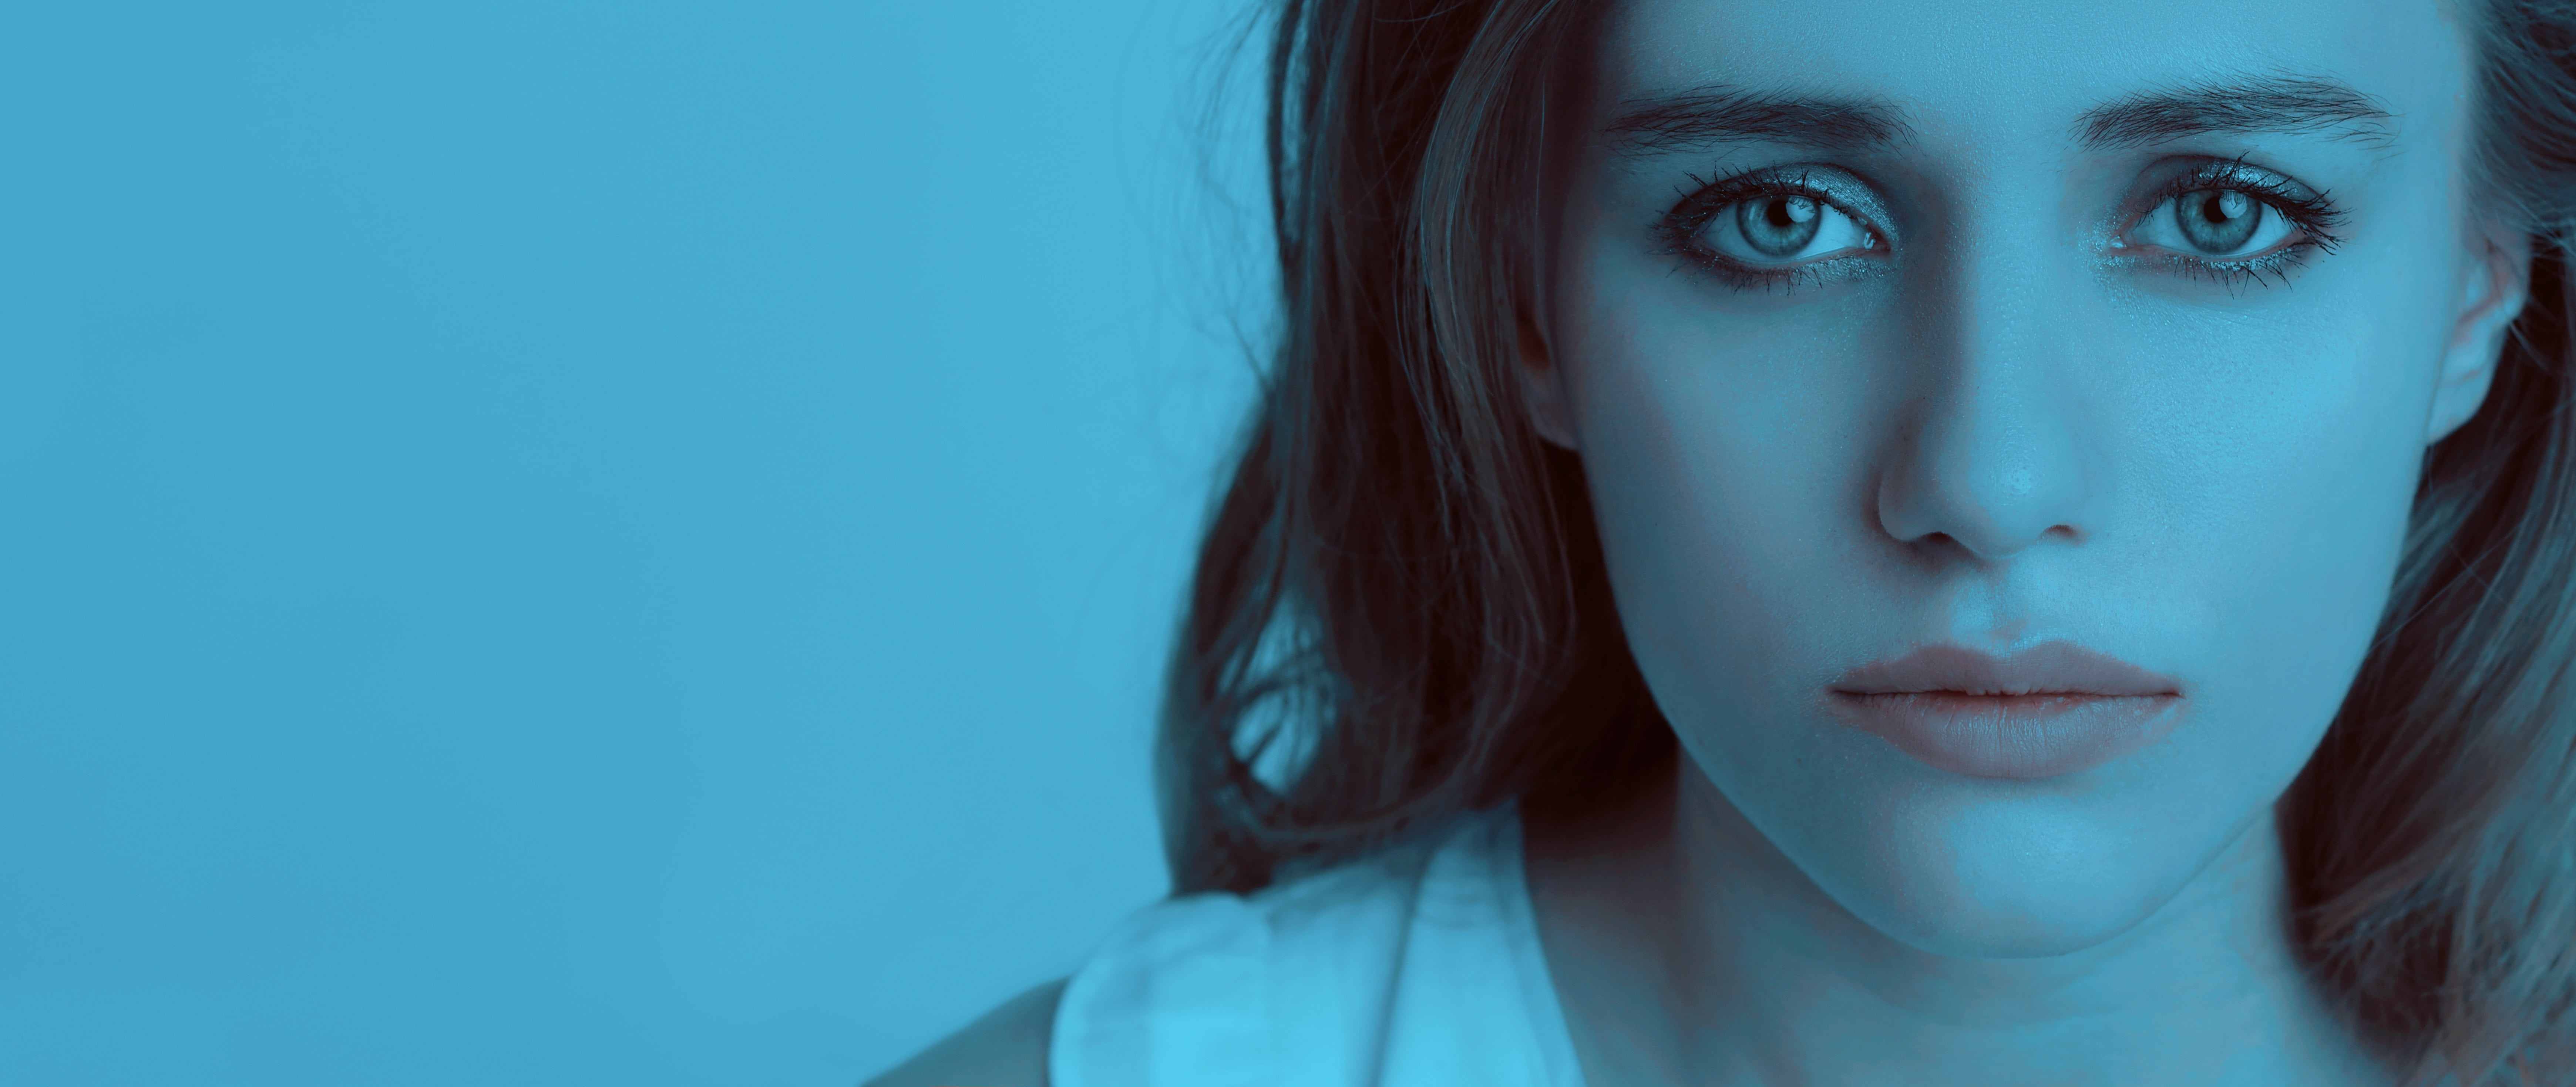 woman wearing white shirt with blue background, sad girl, girl crying